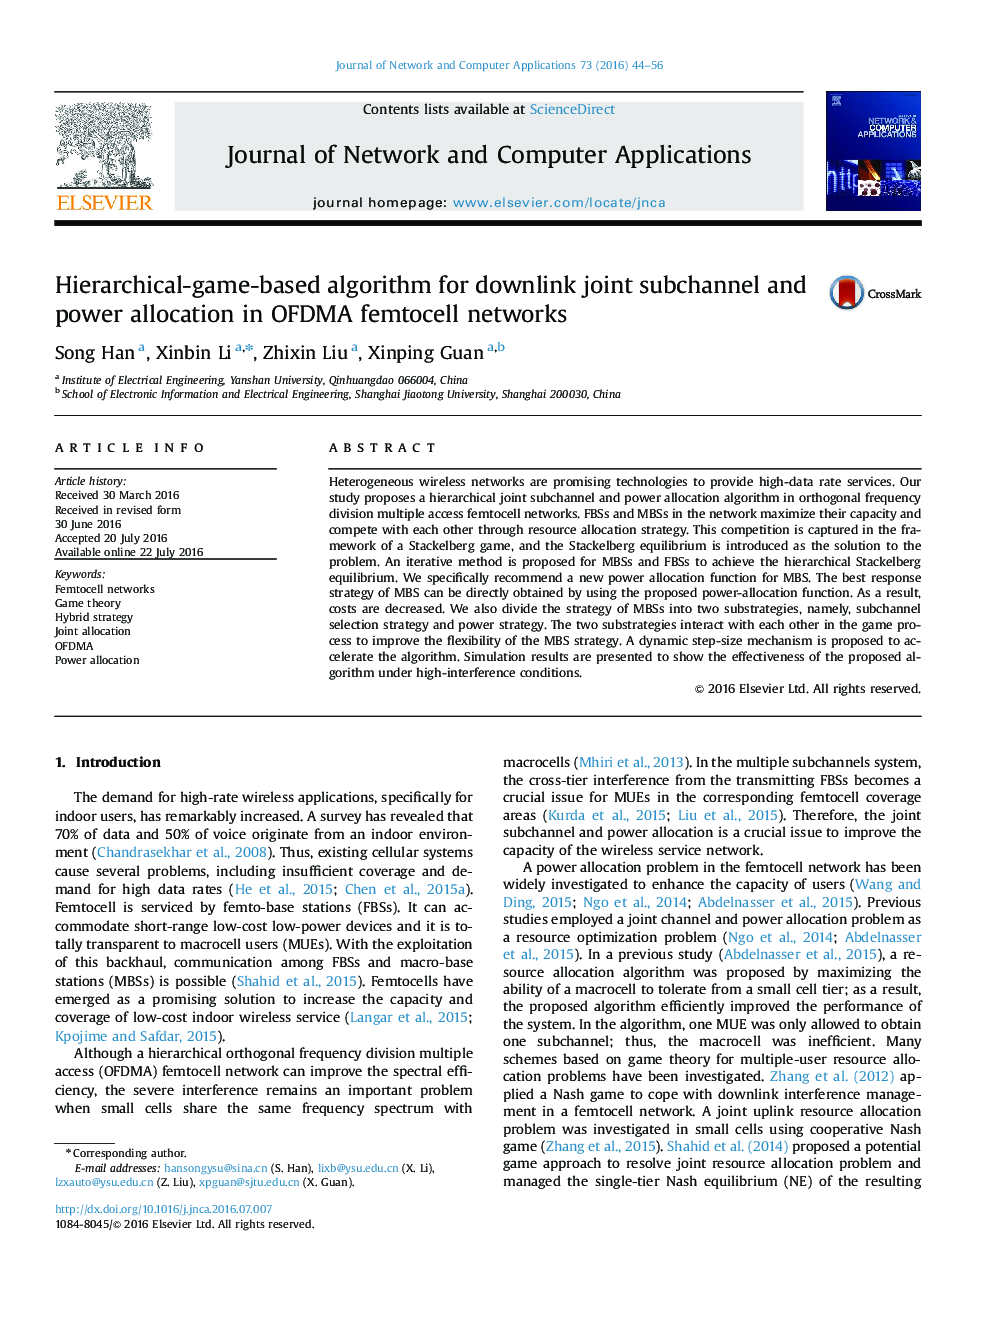 Hierarchical-game-based algorithm for downlink joint subchannel and power allocation in OFDMA femtocell networks